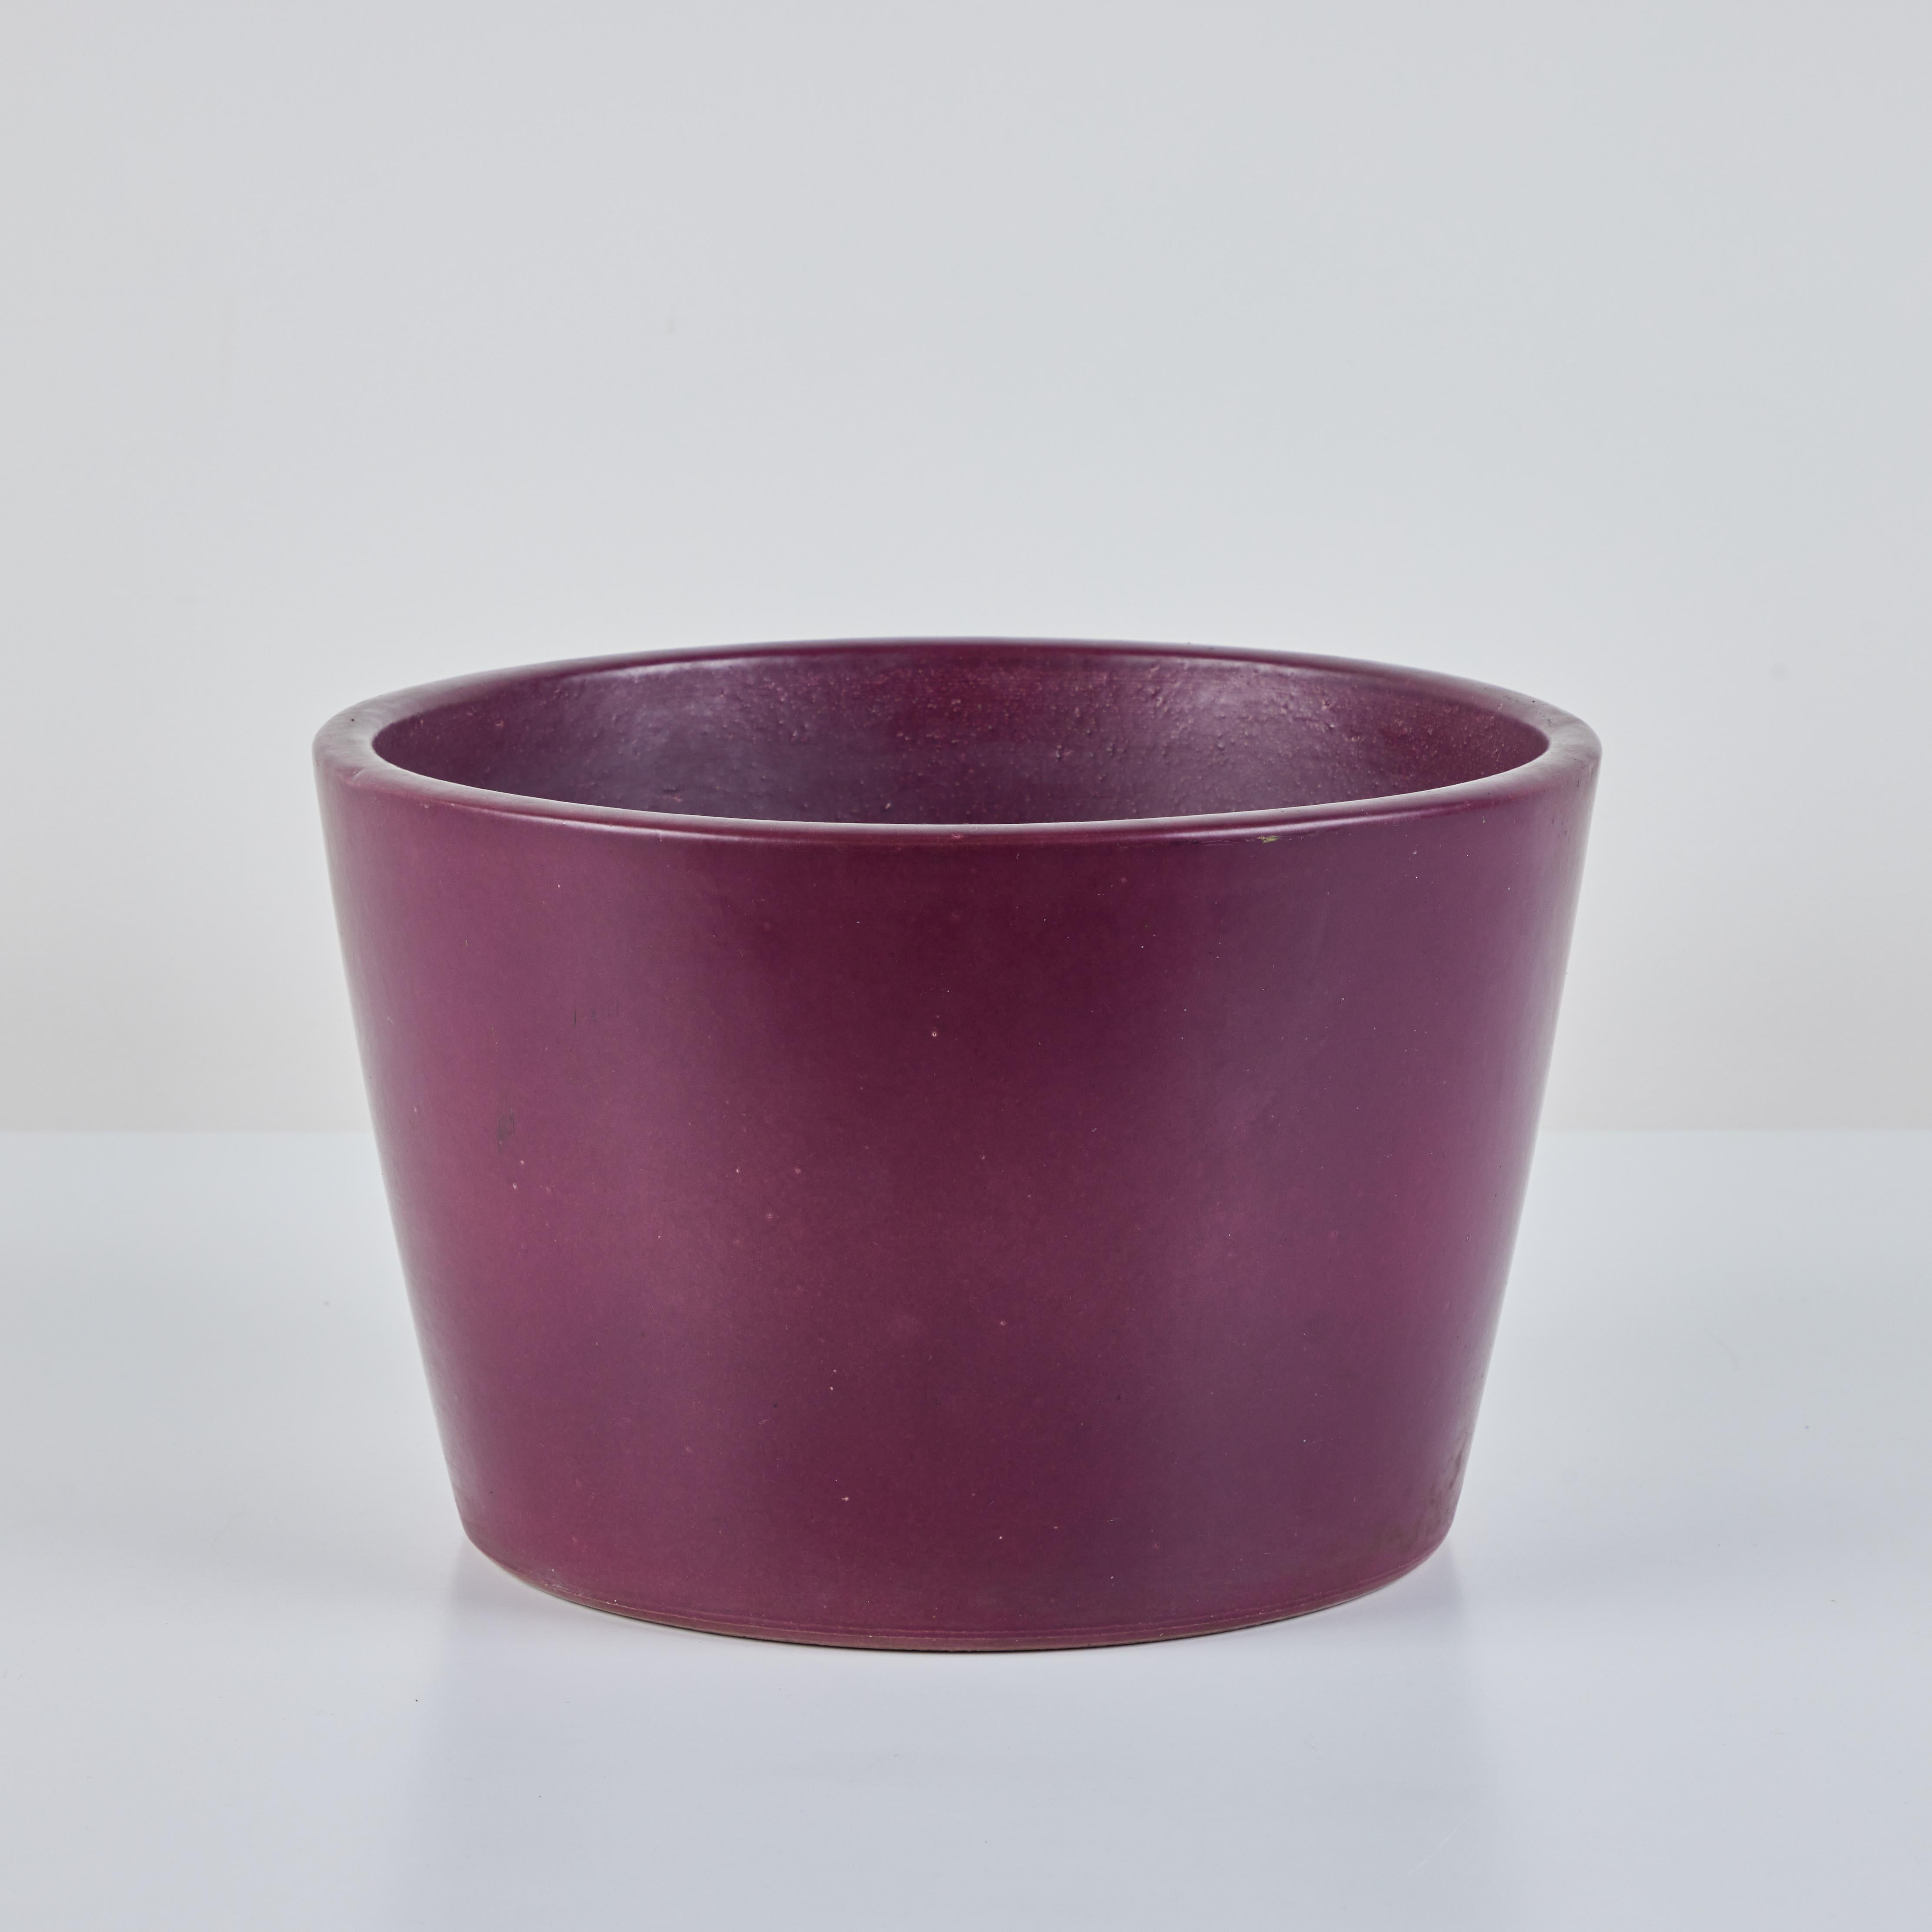 Malcom Leland Planter for Architectural Pottery, c.1960s, USA. This stoneware planter has a purple glazed exterior and interior. The round planter tappers inwards slightly towards the bottom. 

Dimensions
12.25